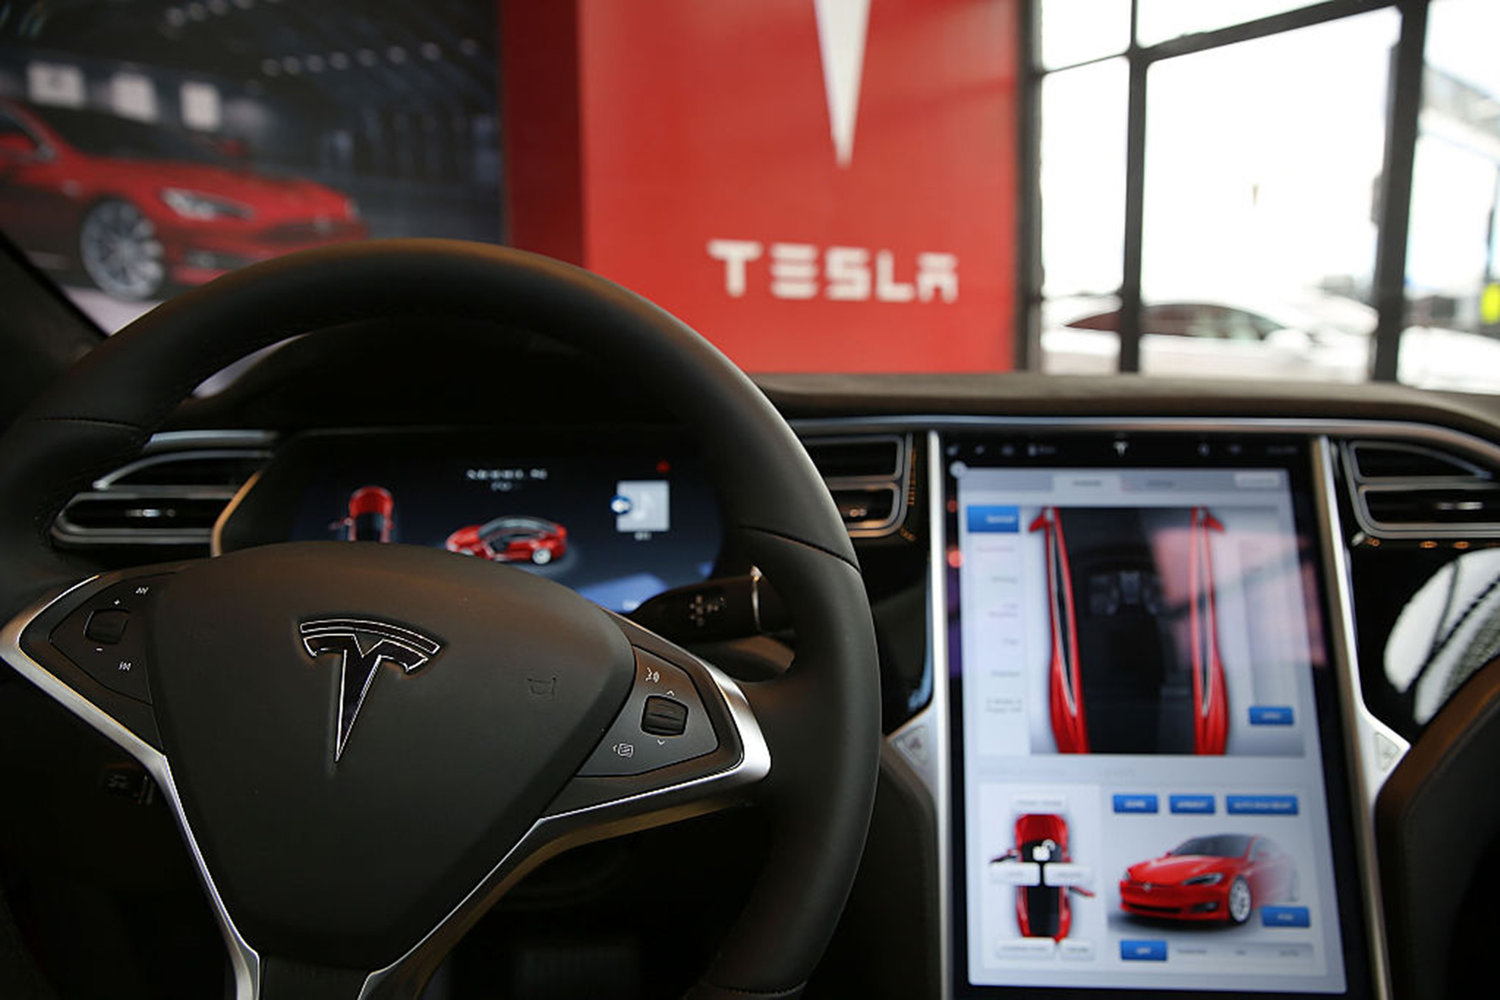 The inside of a Tesla vehicle is viewed as it sits parked in a new Tesla showroom and service center in Red Hook, Brooklyn on July 5, 2016 in New York City. (Spencer Platt/Getty Images/TNS)